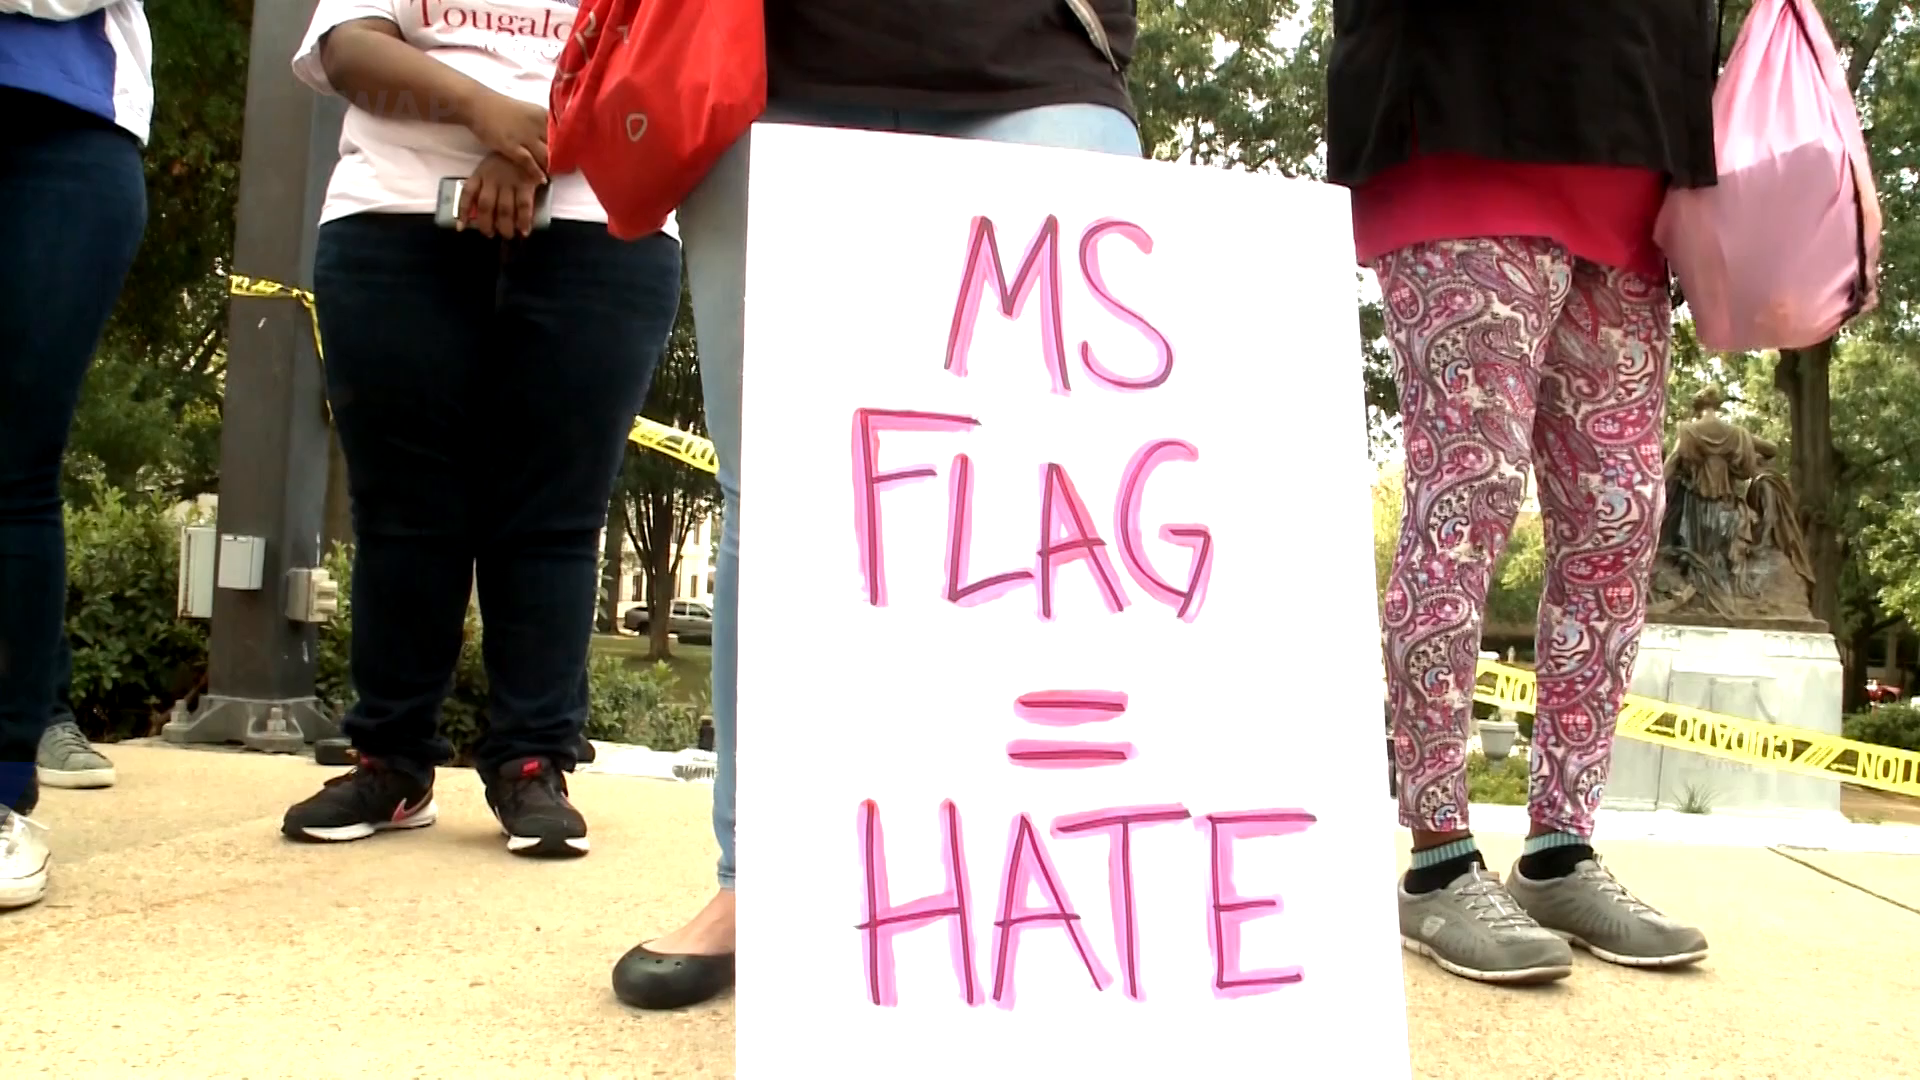 Protests say 'Take Down this Flag,' at Mississippi State Capitol